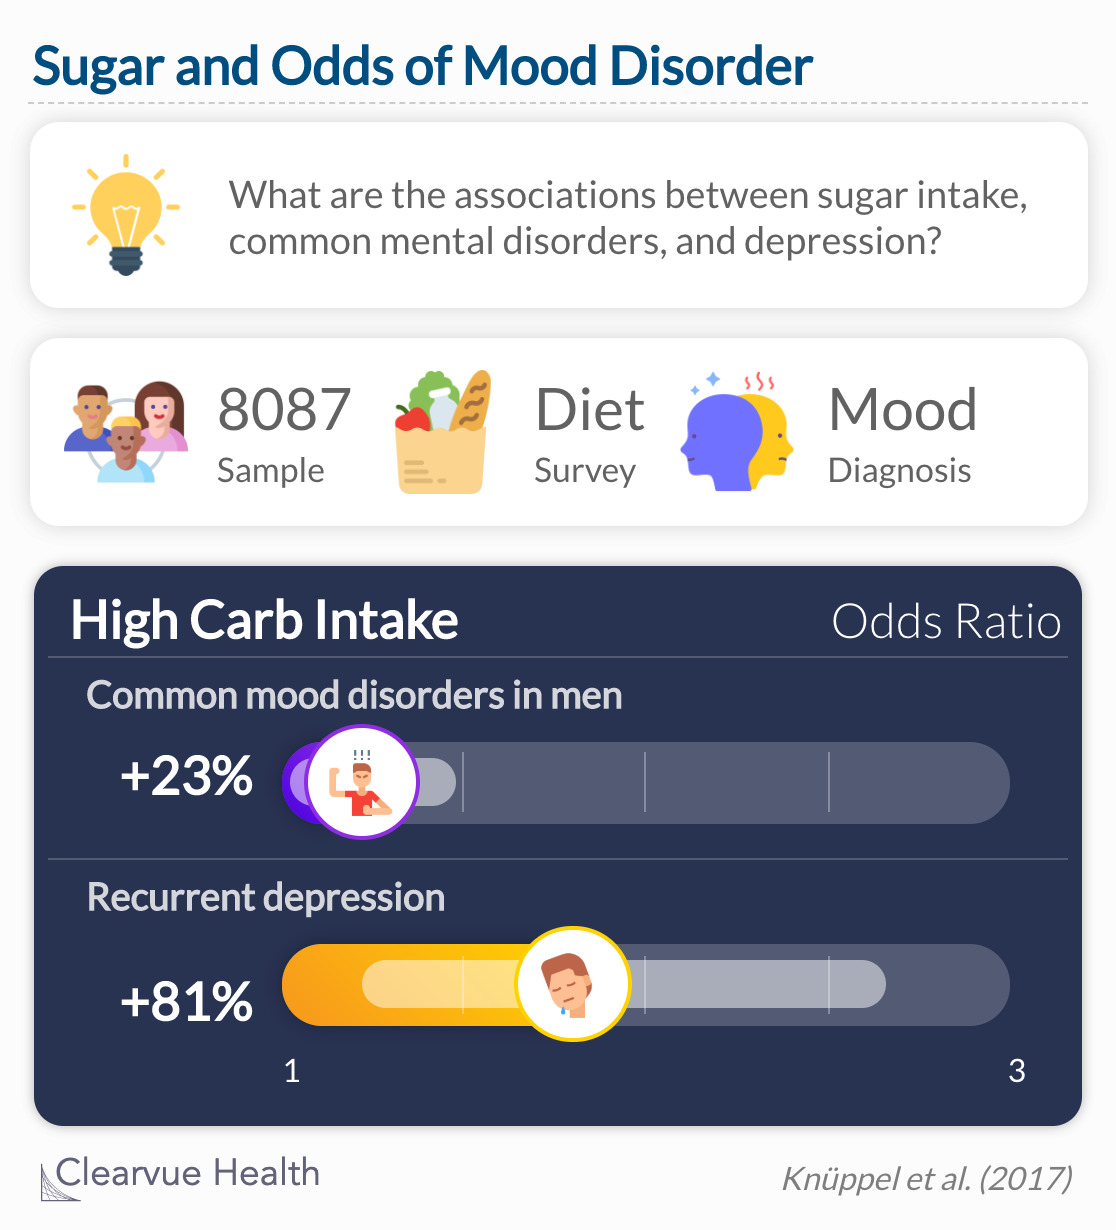 Sugar intake increases your risk of mood disorders like depression 